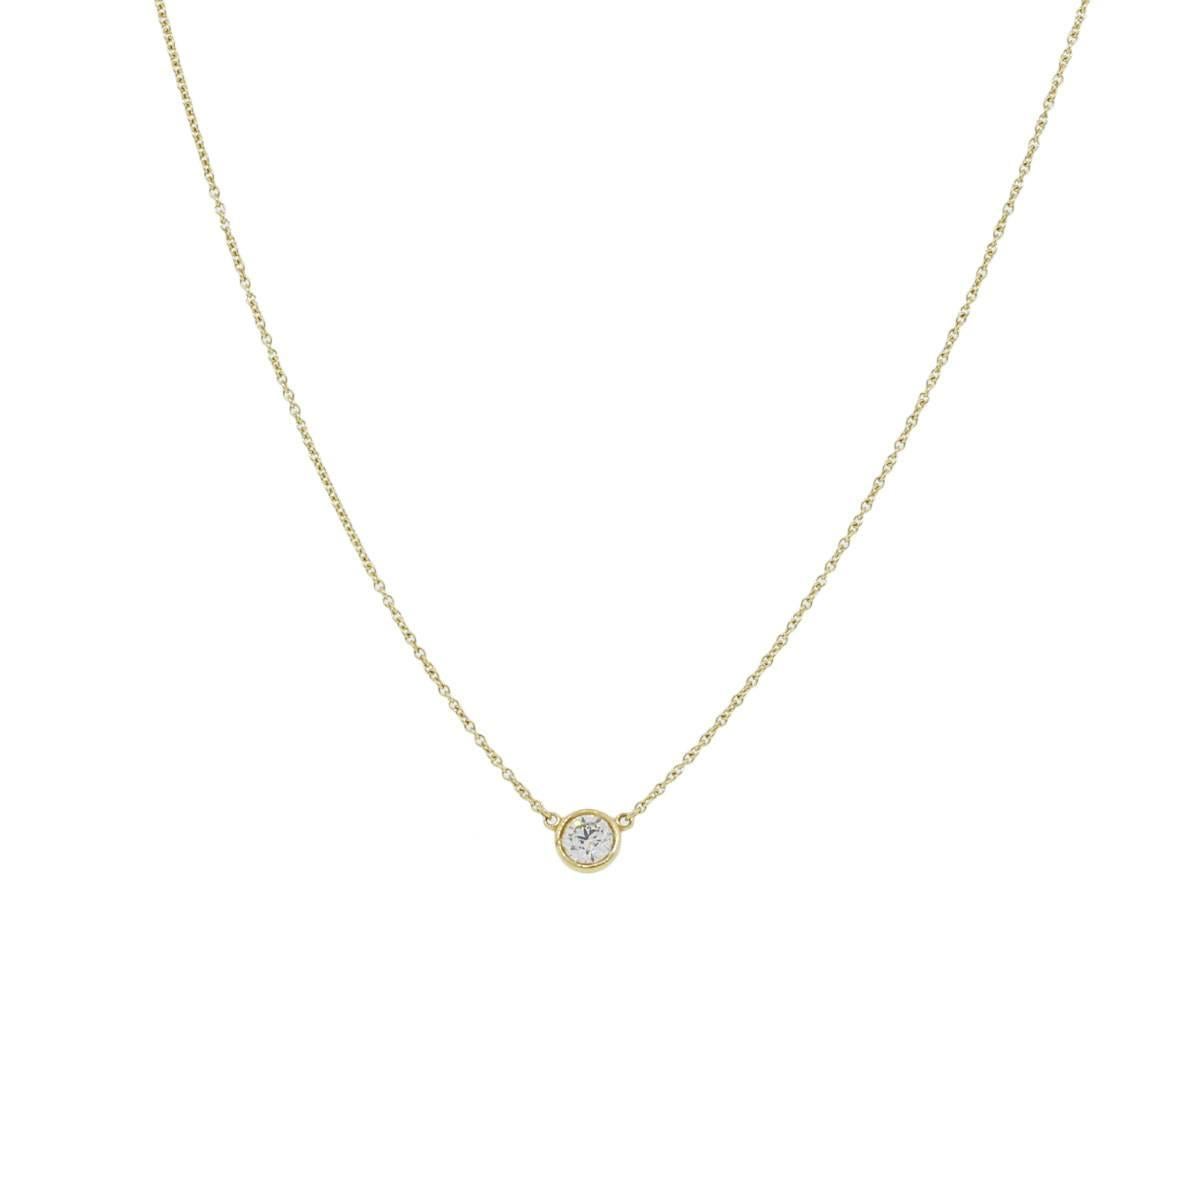 Designer: Tiffany & Co.
Material: 18k yellow gold
Diamond Details: Approximately 0.38ct round brilliant diamond. Diamond is G/H in color and VS in clarity
Pendant Measurements: 0.23″ x 0.11″ x 0.31″
Clasp: Spring ring clasp
Necklace length: Necklace